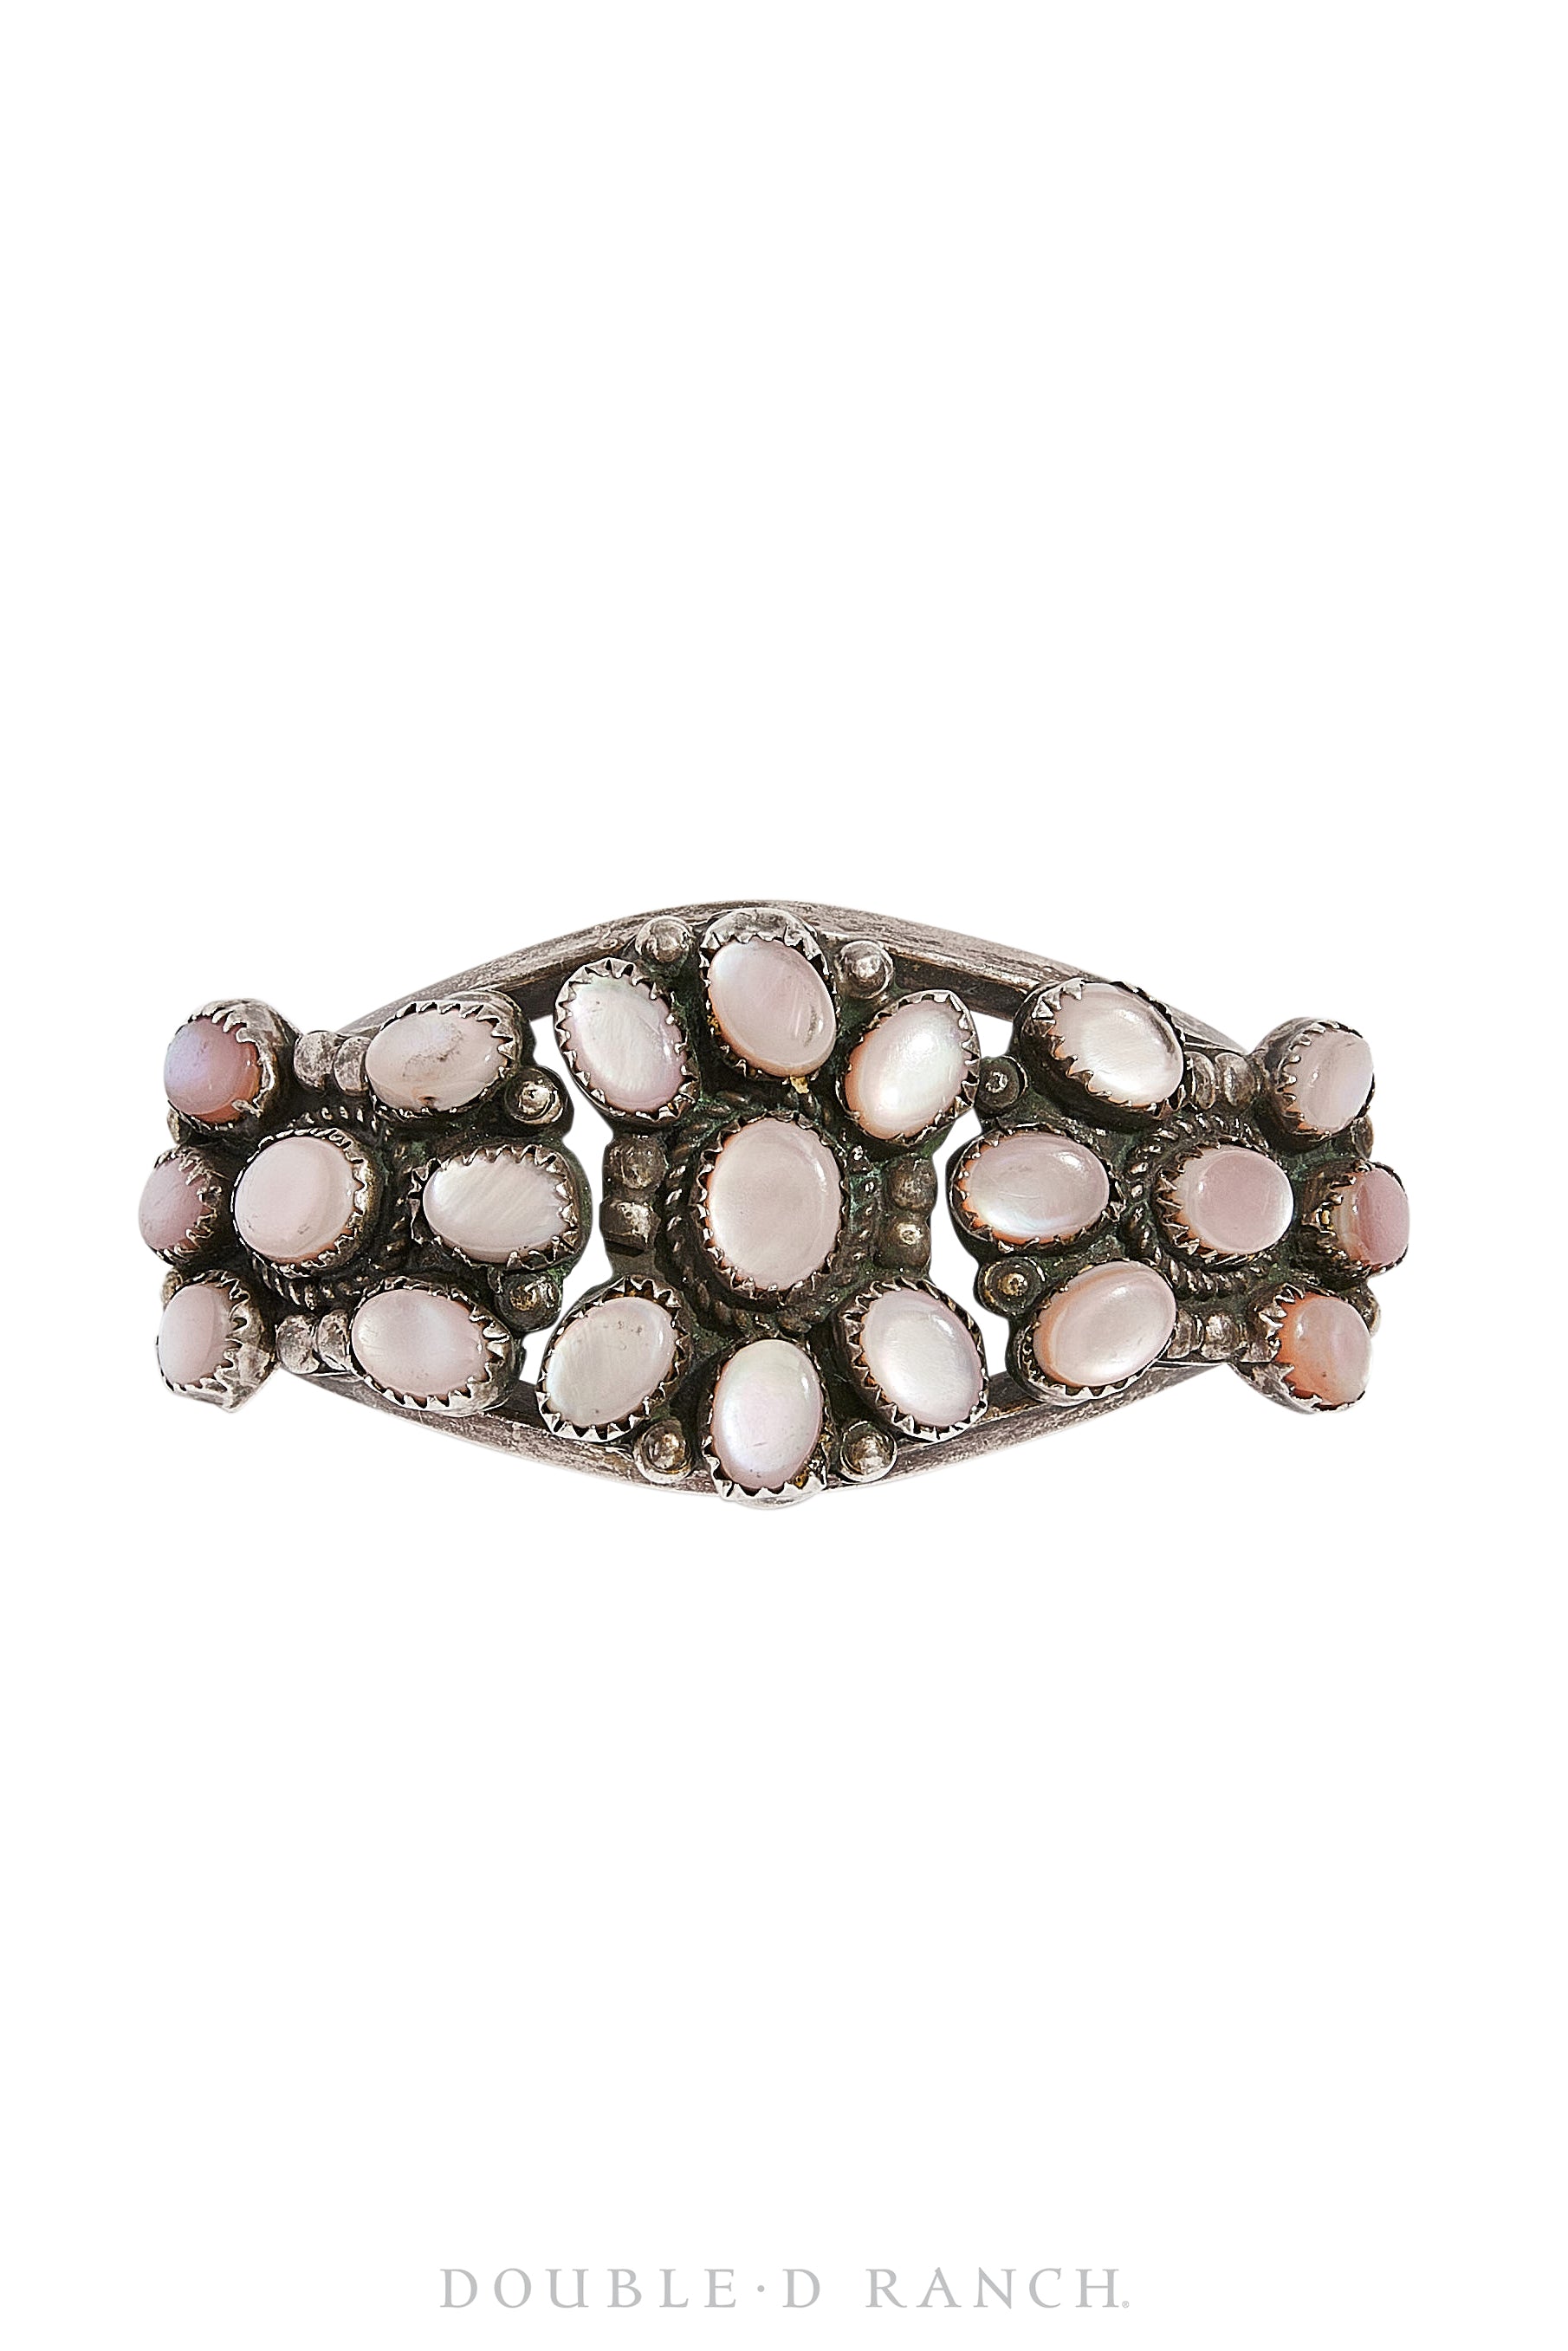 Cuff, Cluster, Pink Mother of Pearl, Vintage, Old Pawn, 3243